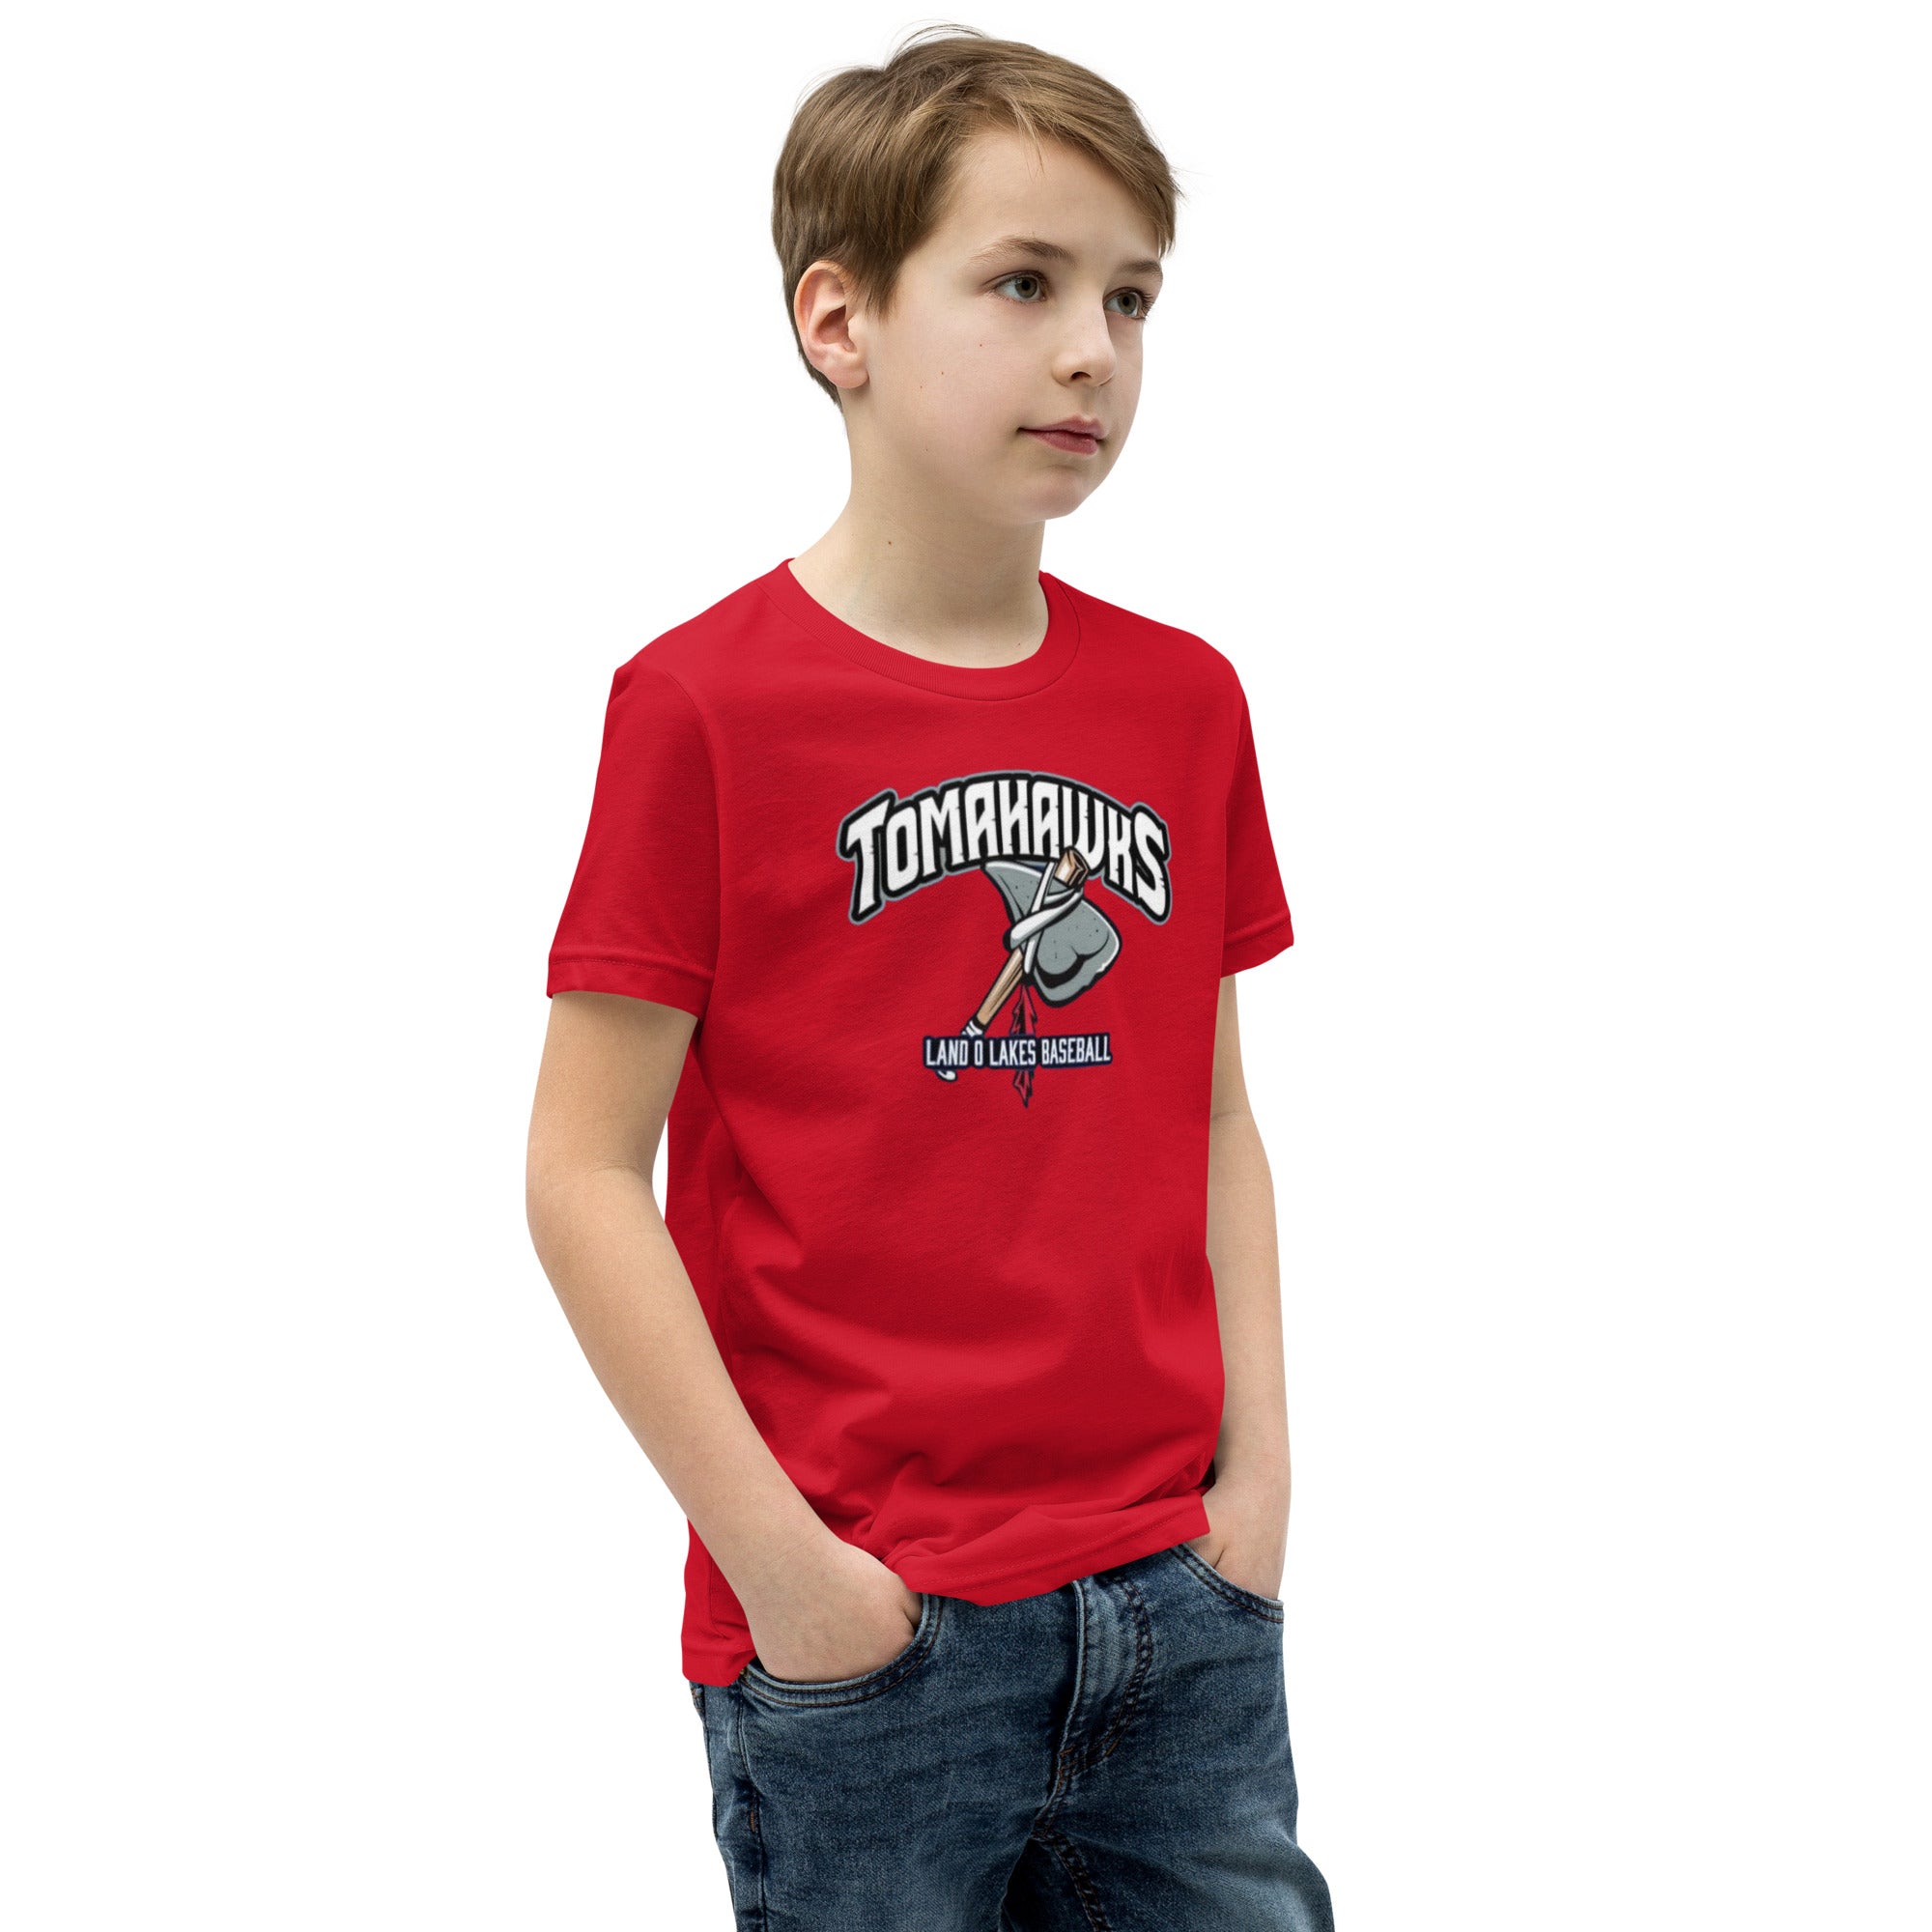 LOL Tomahawks Personalized Player Youth Short Sleeve T-Shirt